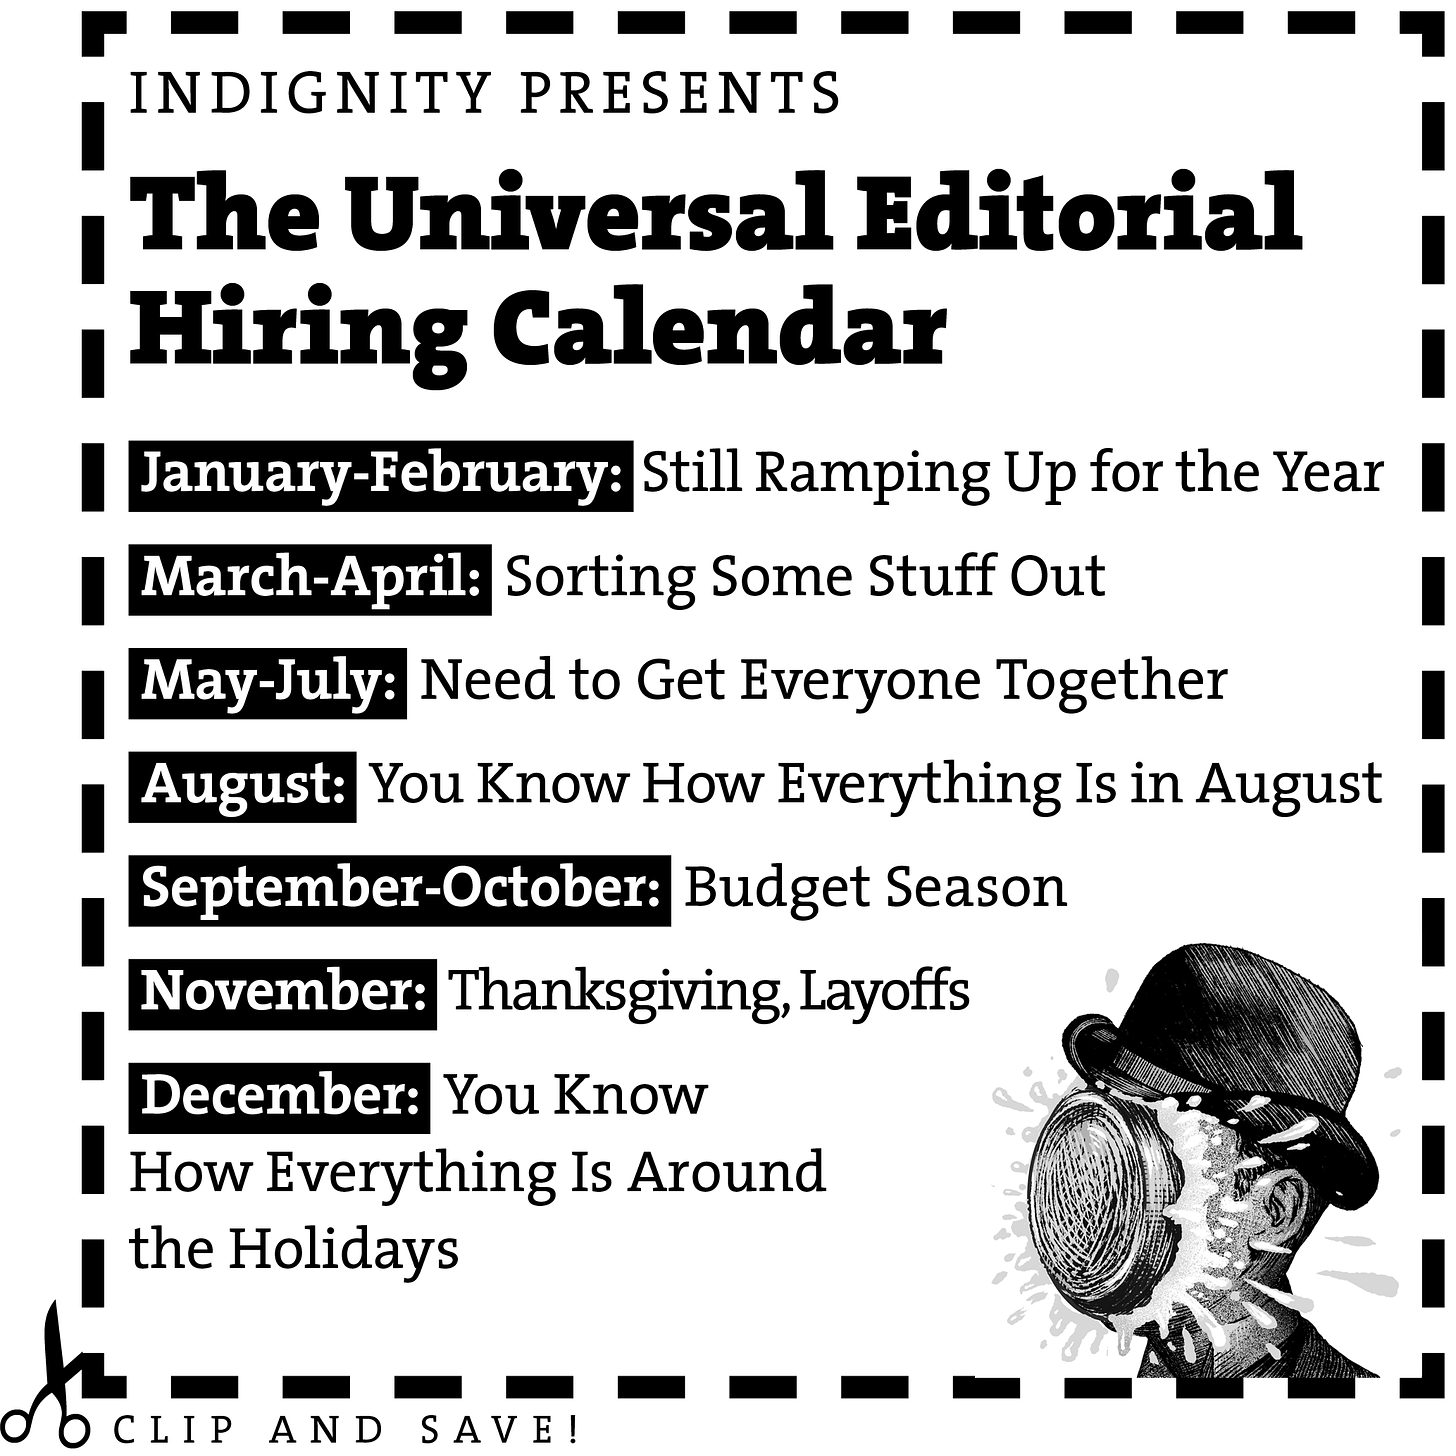 Clip and Save! Indignity Presents the Universal Editorial Hiring Calendar Jan.-Feb.: Still Ramping Up for the Year March-April: Sorting Some Stuff Out May–July: Need to Get Everyone Together You Know How Everything Is in August September–October: Budget Season November: Thanksgiving, Layoffs You Know How Everything Is Around the Holidays